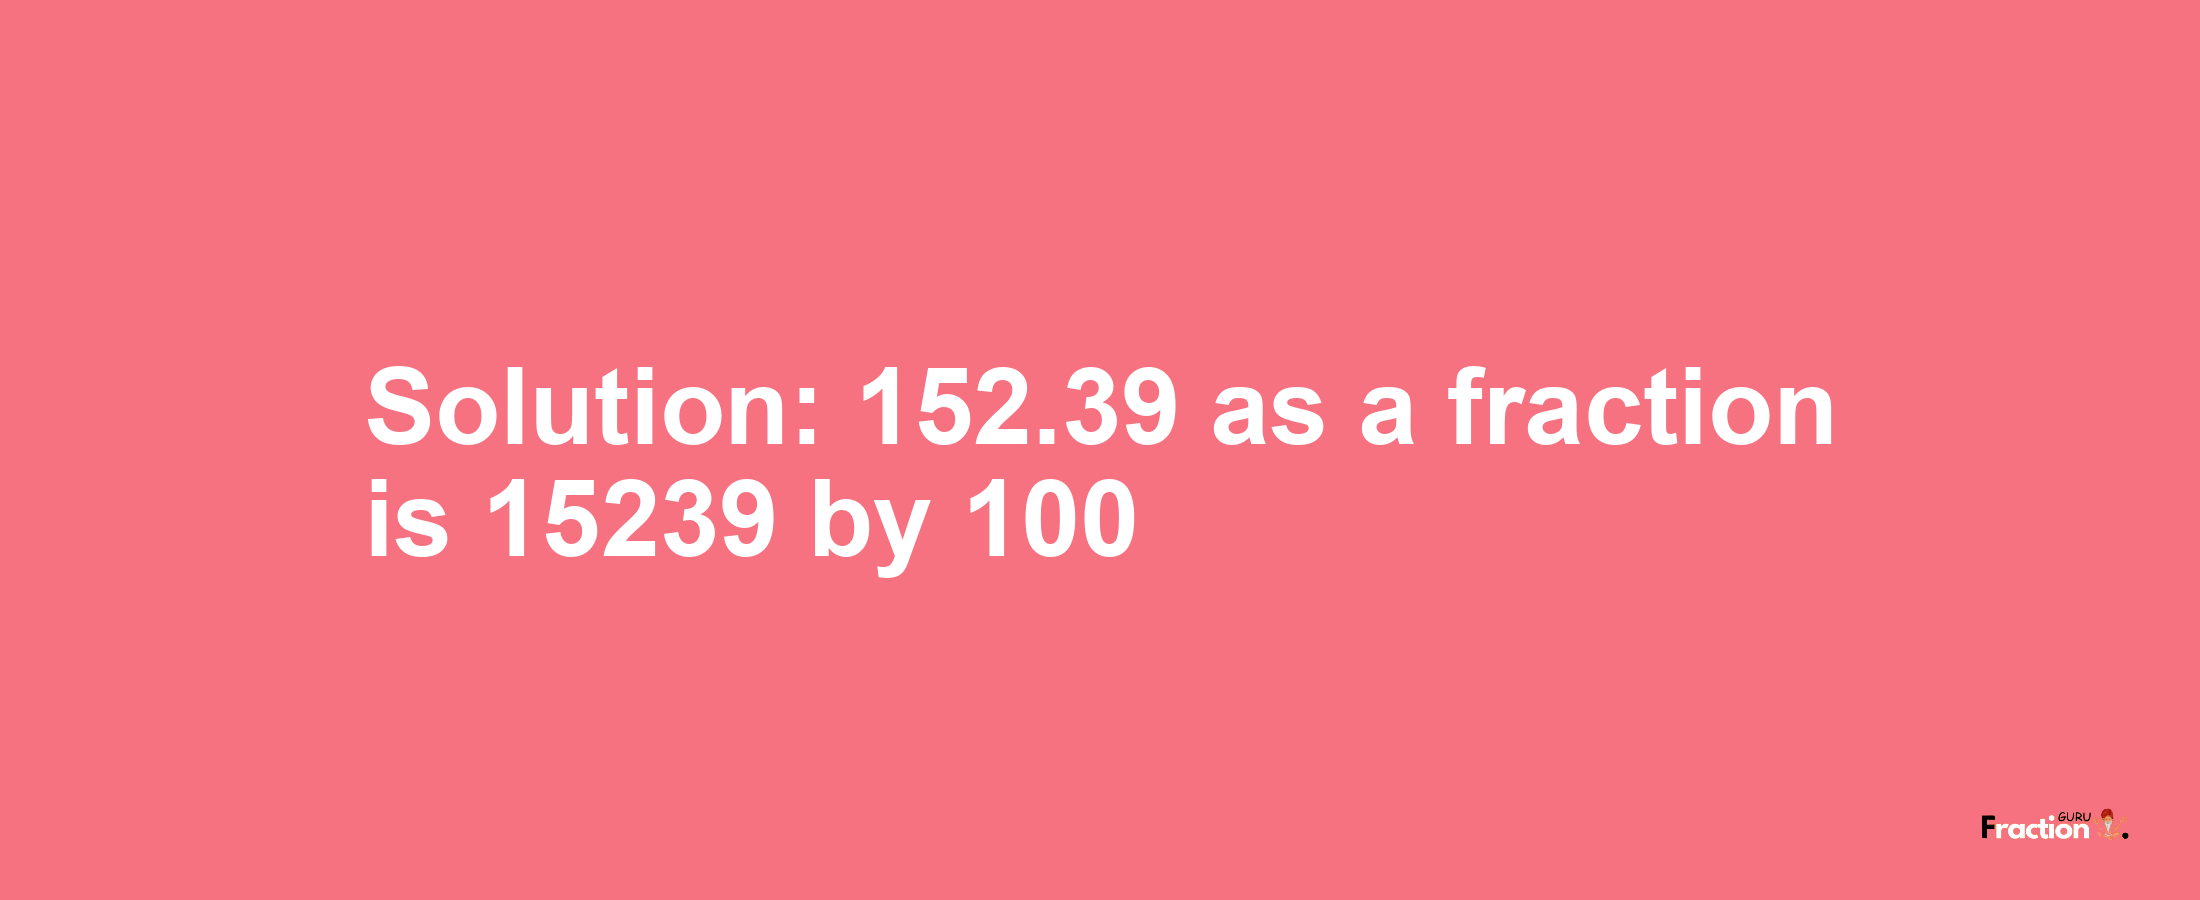 Solution:152.39 as a fraction is 15239/100